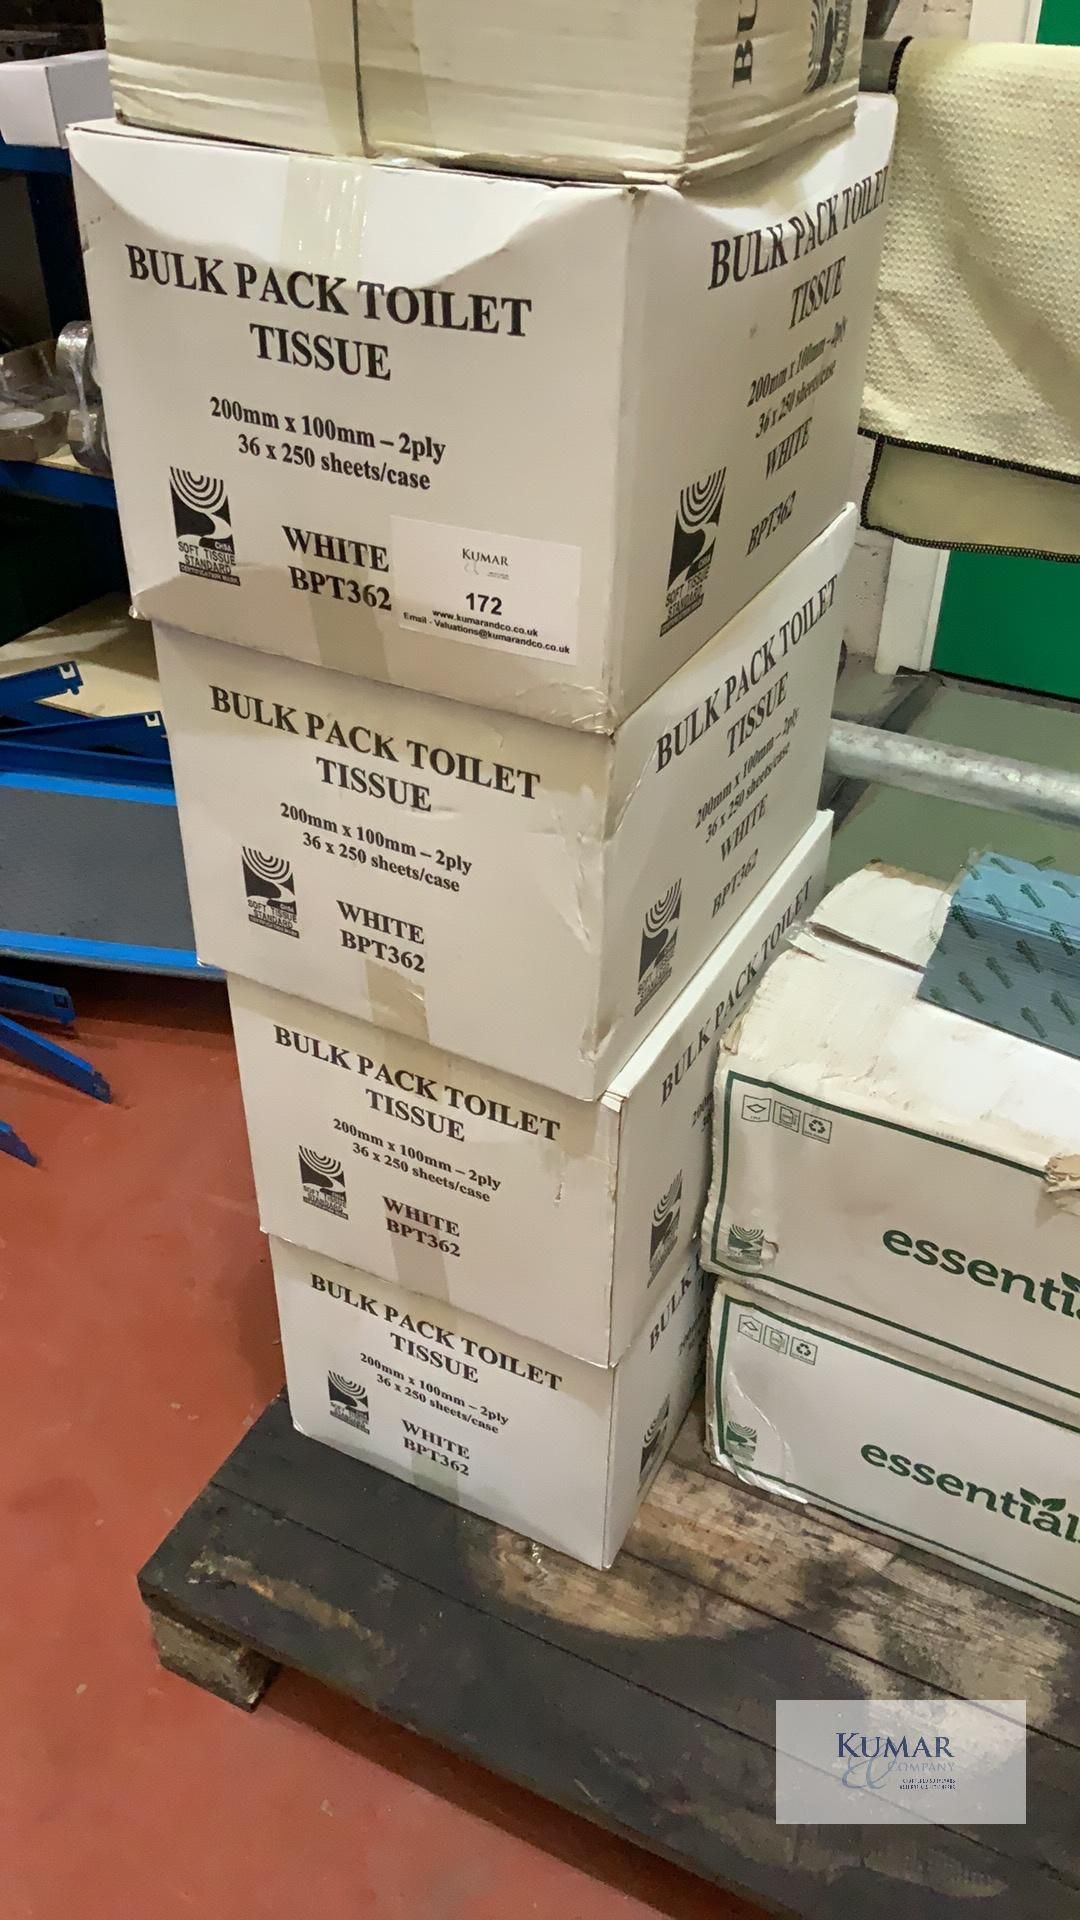 4.5 Outers Bulk Pack Toilet Tissue - 200mm x 100mm - 2 Ply, 36 x 250 Sheets Per Outer, White BPT362, - Image 2 of 13